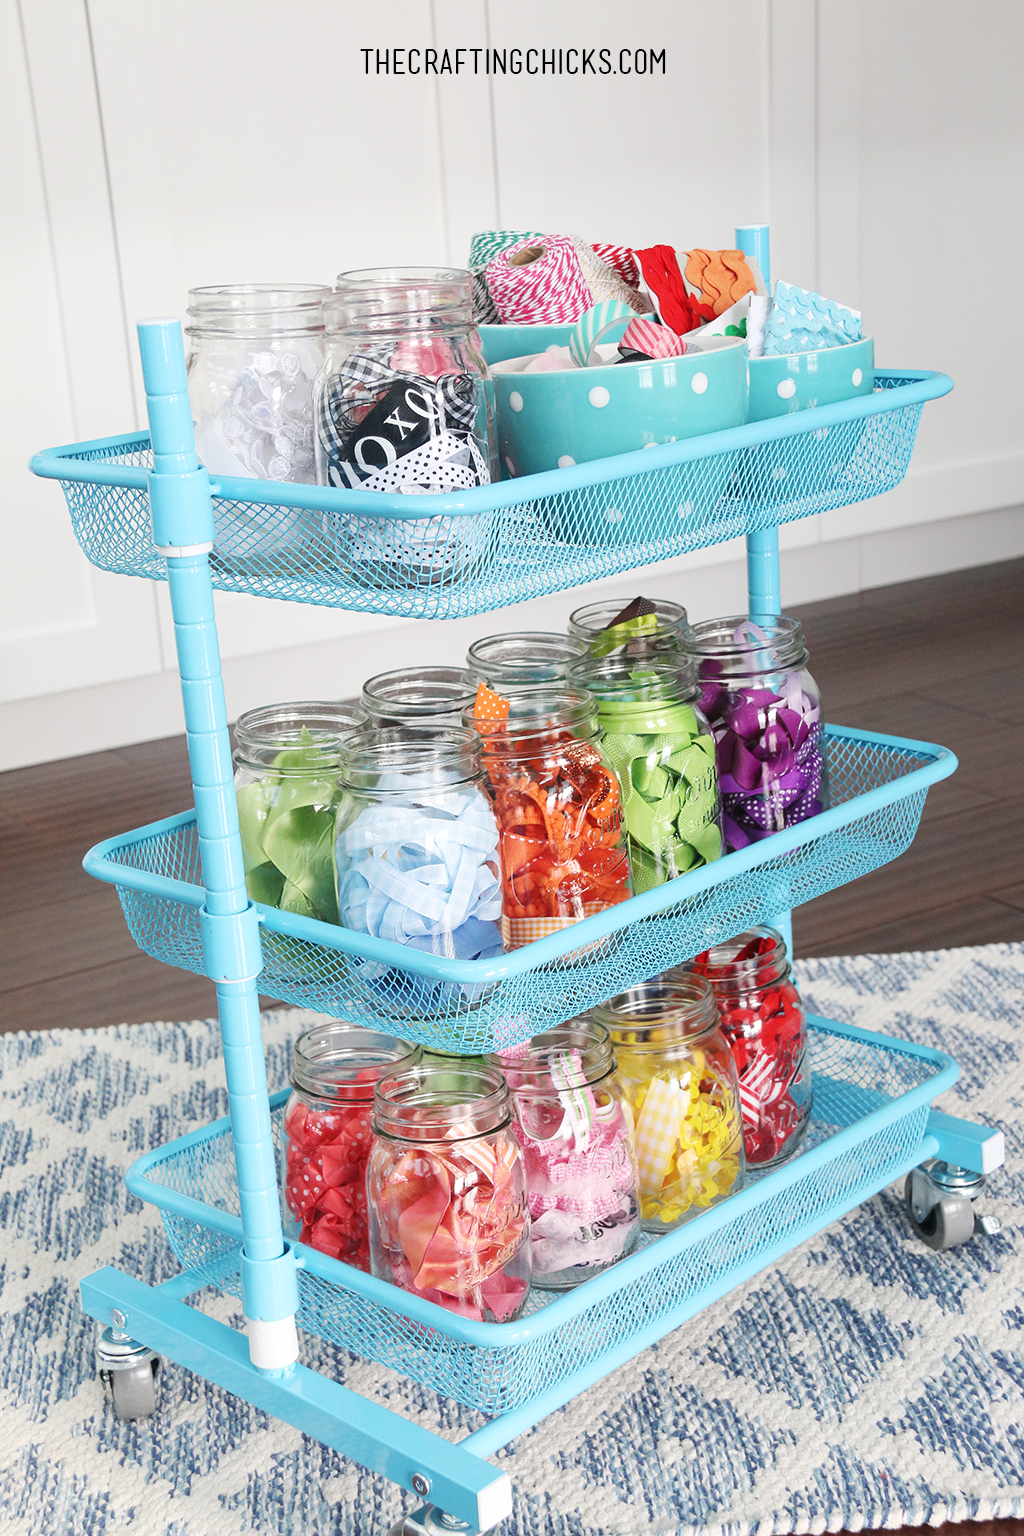 create a well organized #craftroom with ArtBin storage containers